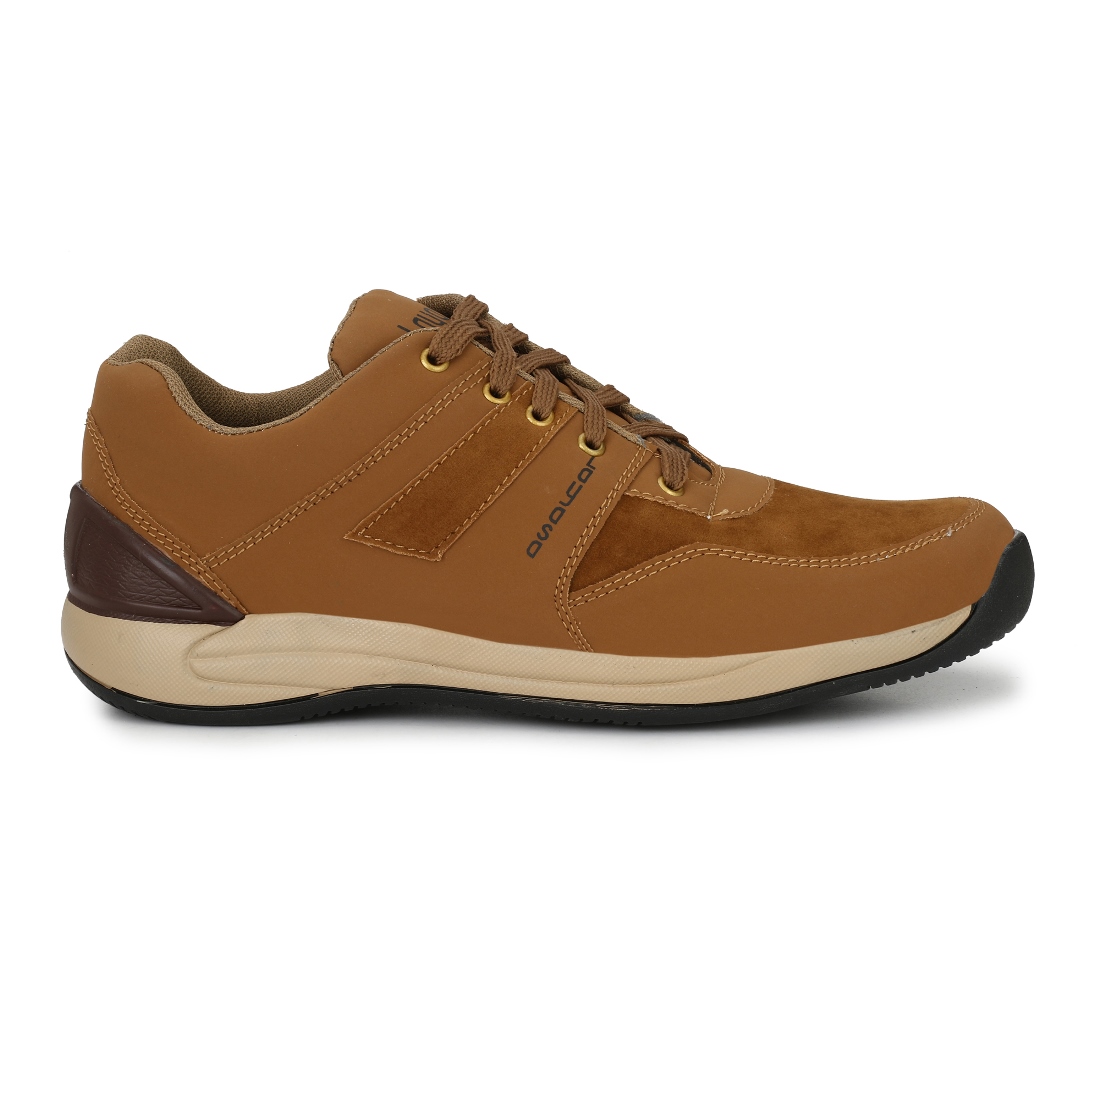 Buy Brown Men's Casual Shoes Online @ ₹499 from ShopClues